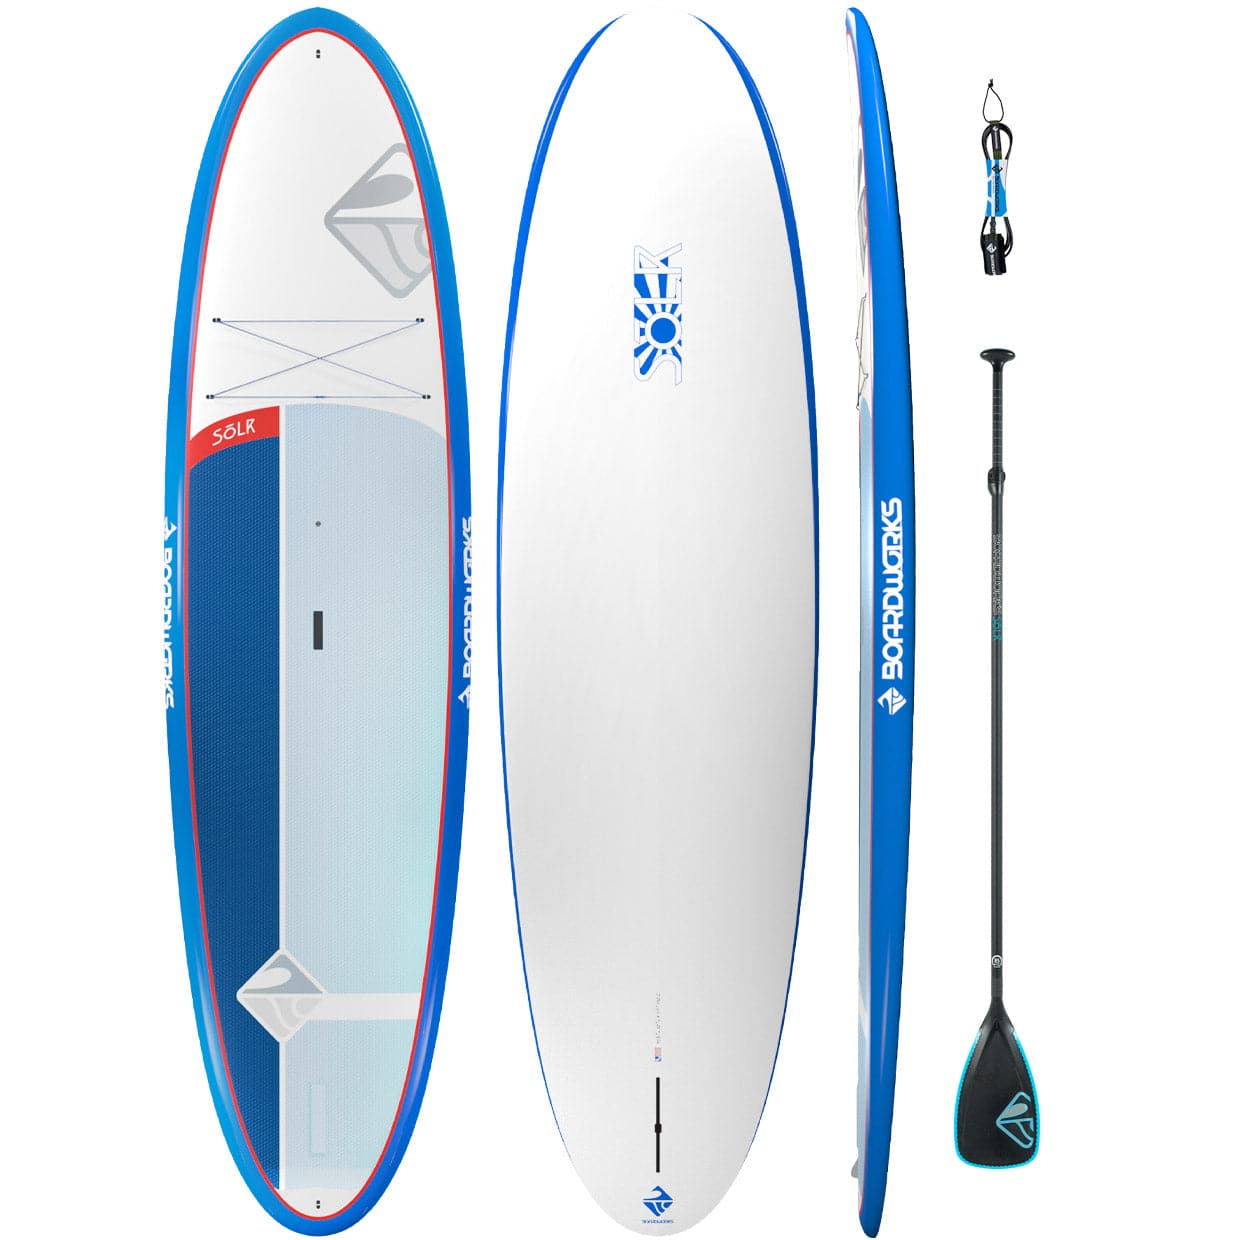 Featuring the Solr 10'6 SUP Package rigid sup manufactured by Boardworks shown here from a fourth angle.